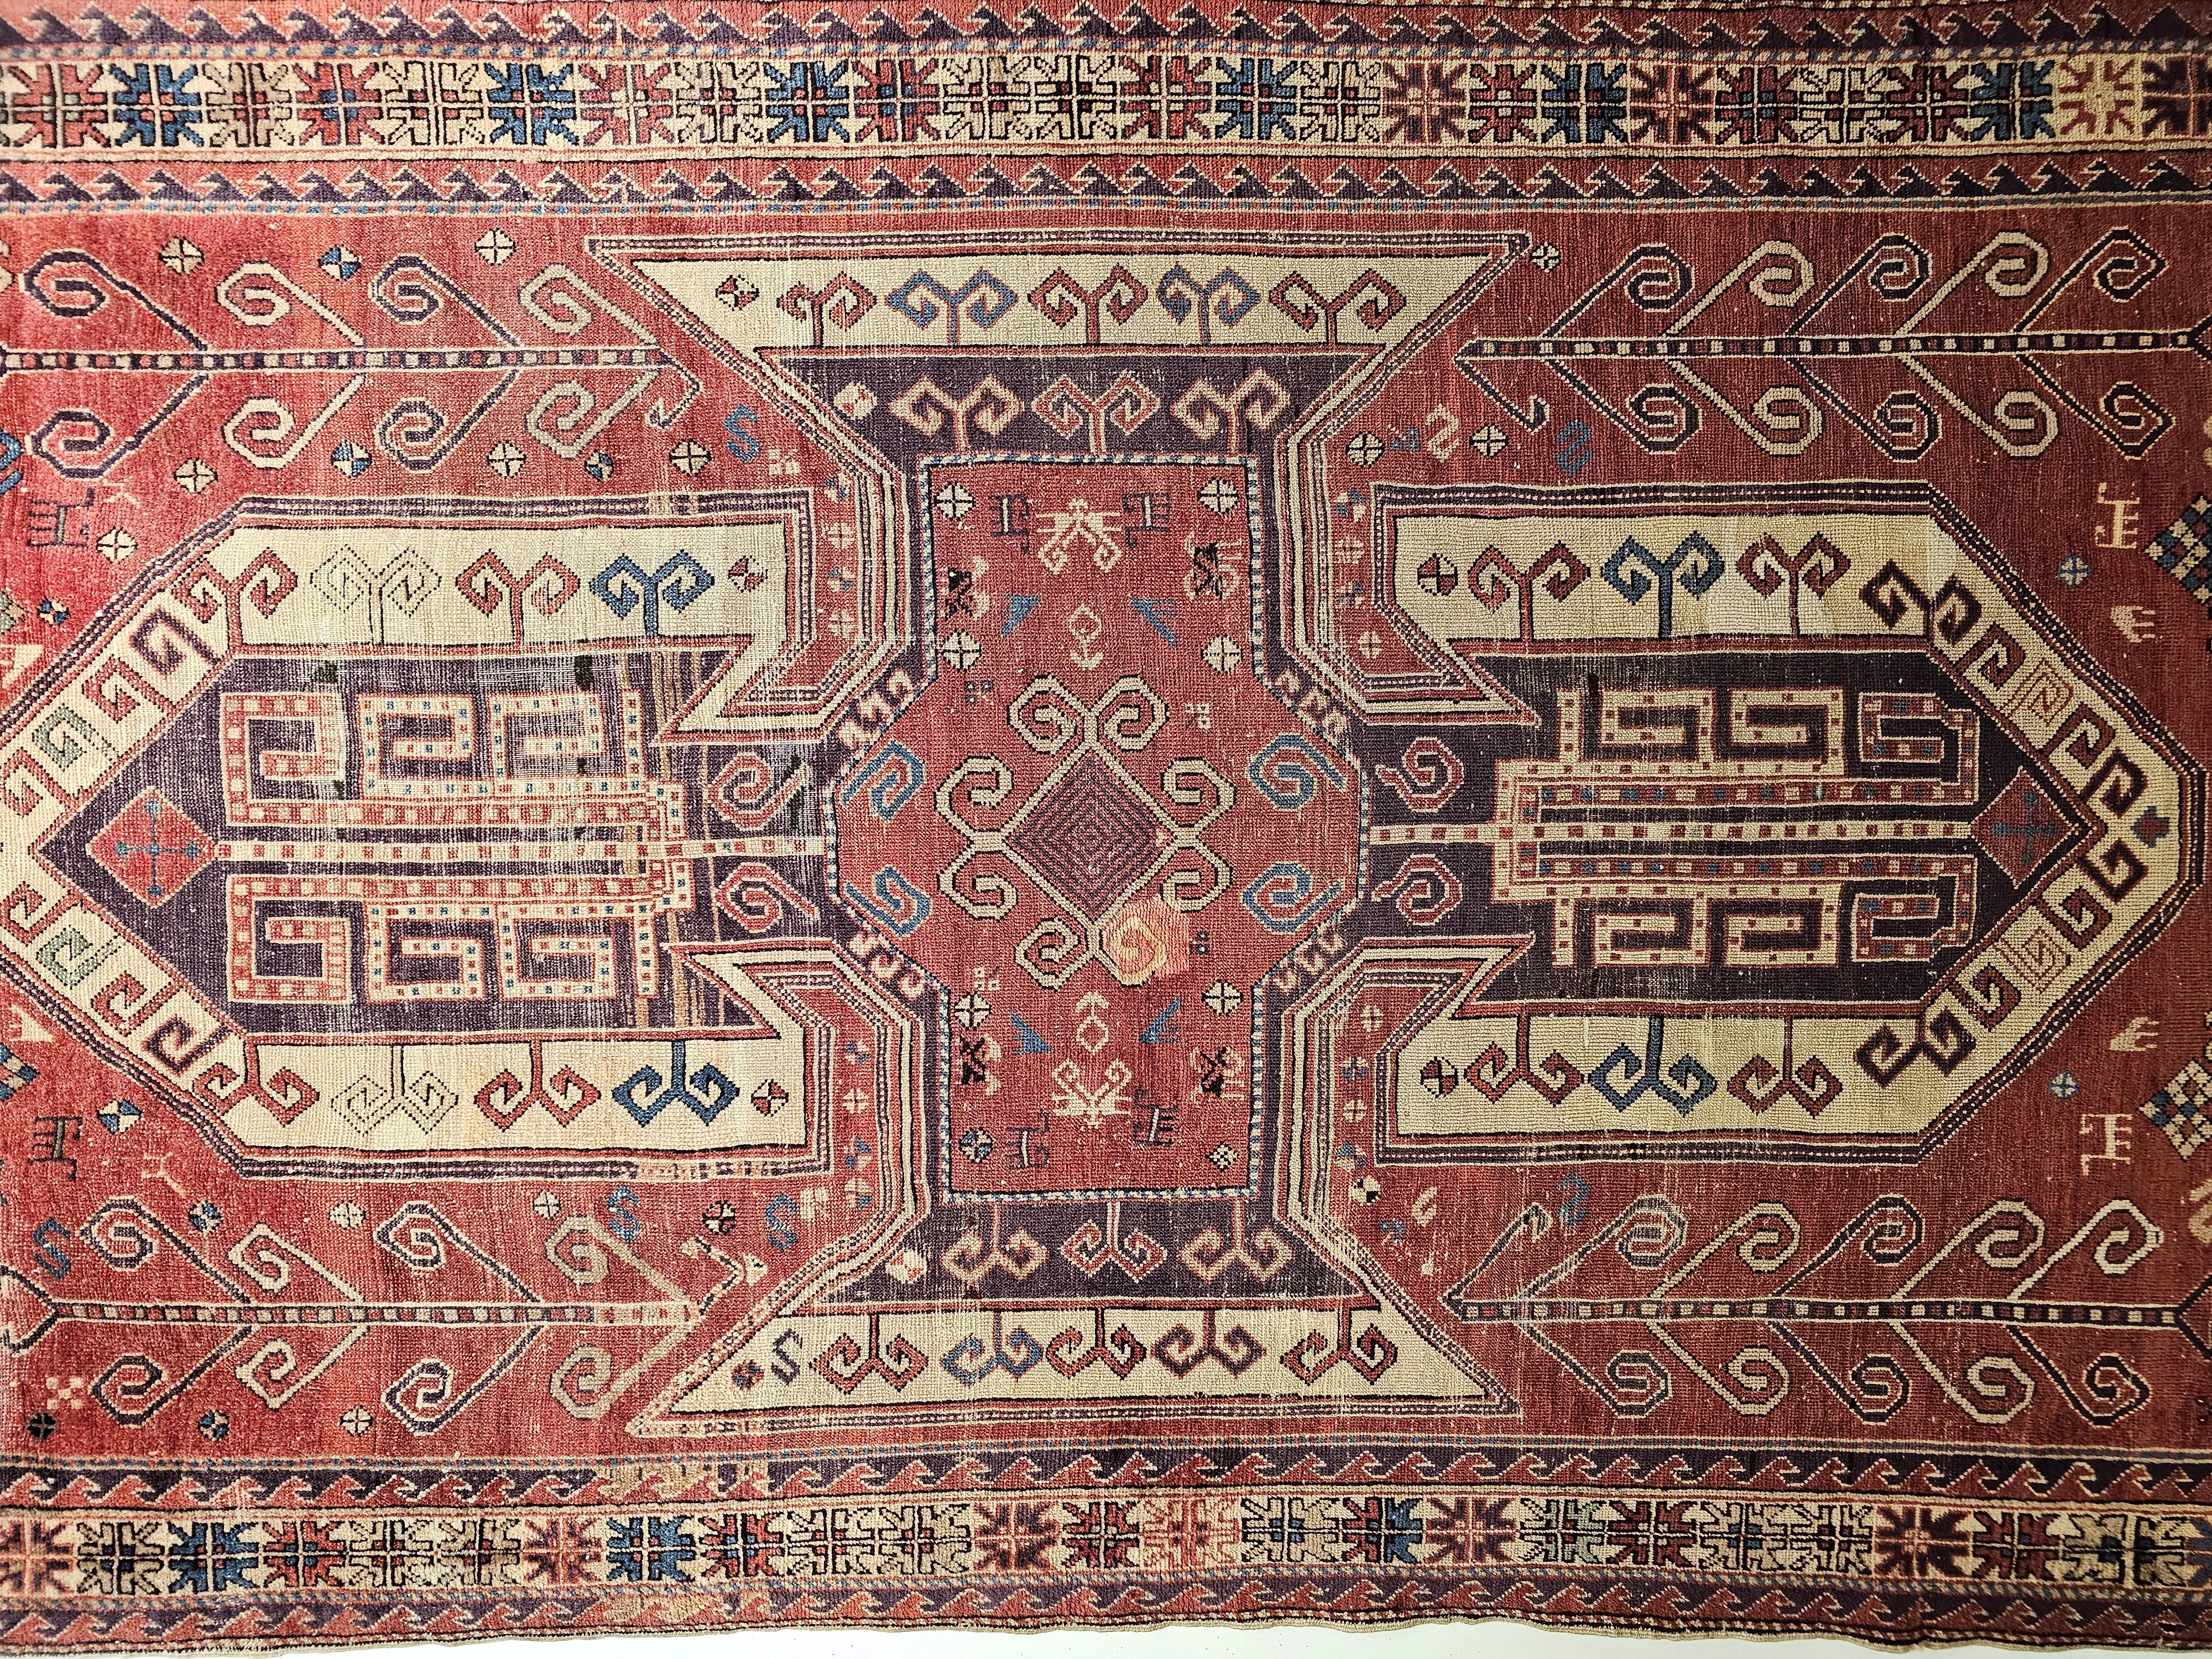 A beautiful Caucasian Sevan Kazak from the early 1900s.  This Kazak is unusually large with the “Sevan” pattern set in a dark red color field.  The large medallion design is in purple, dark red, and ivory colors with geometric design elements in